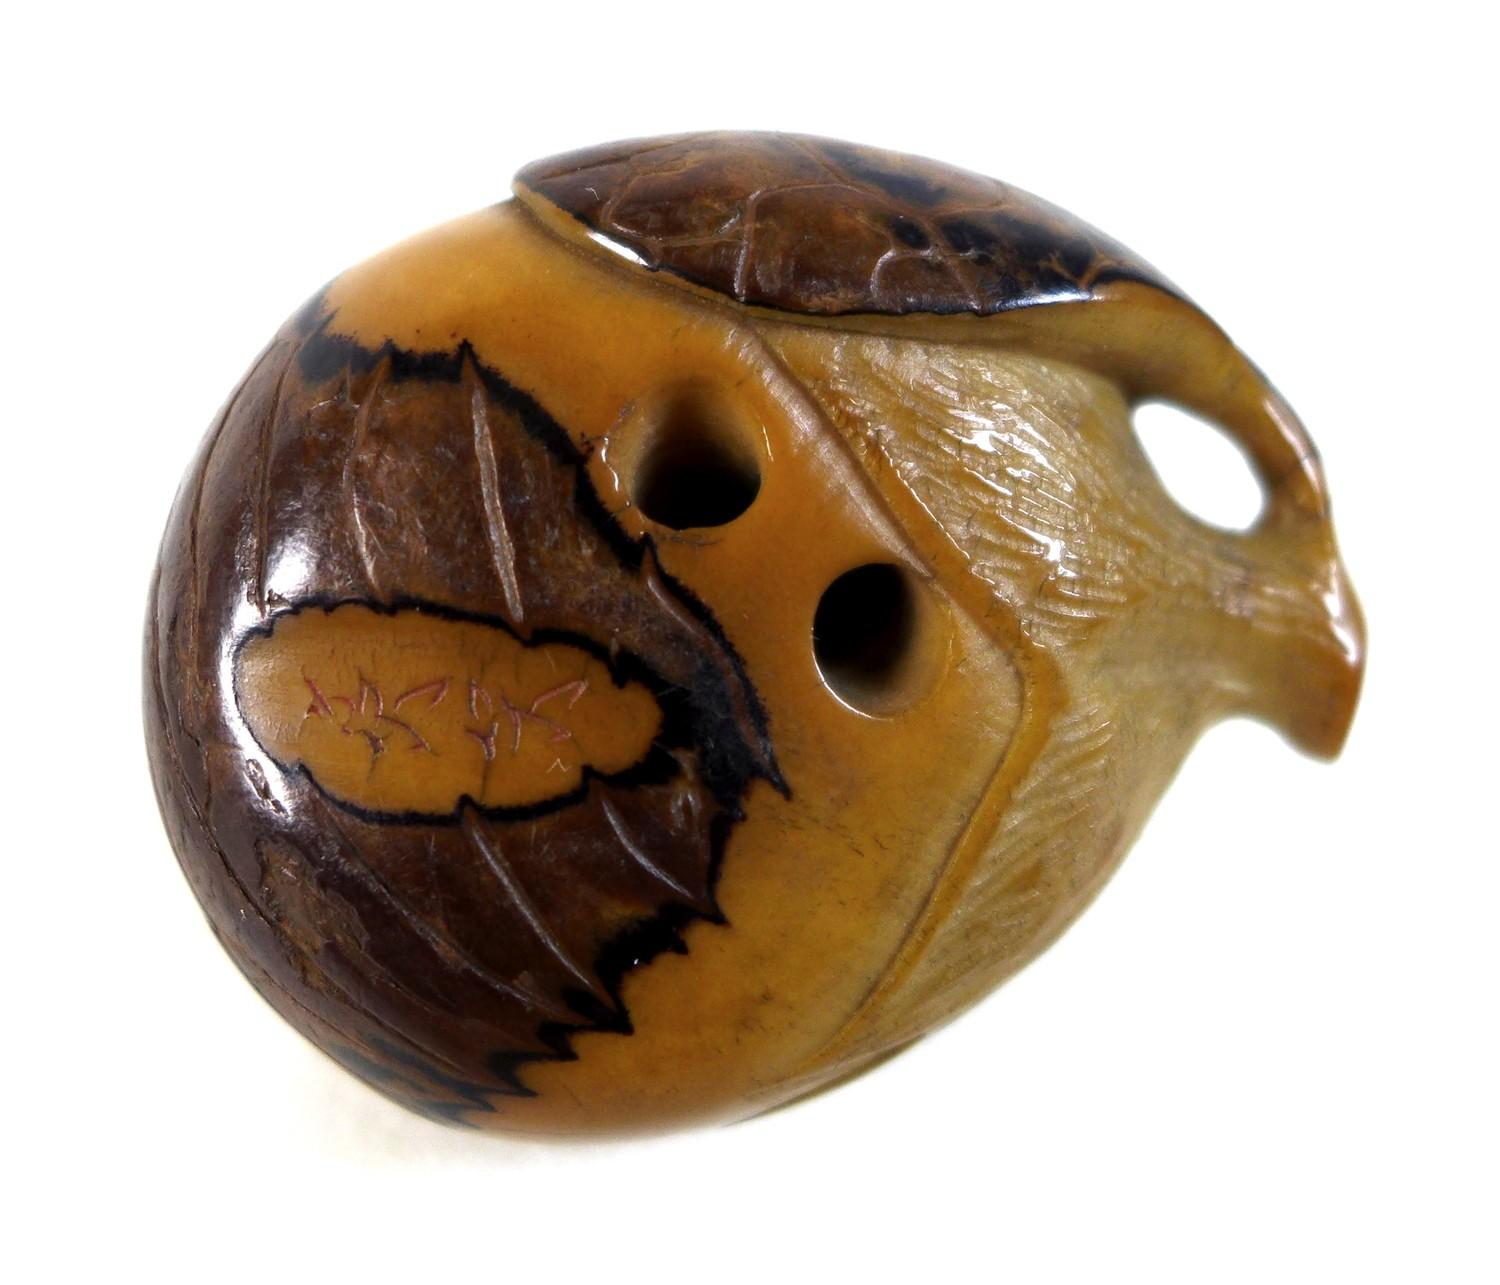 A Japanese Katabori netsuke, likely Meiji period, made out of a tagua nut and shell and carved in - Image 6 of 7